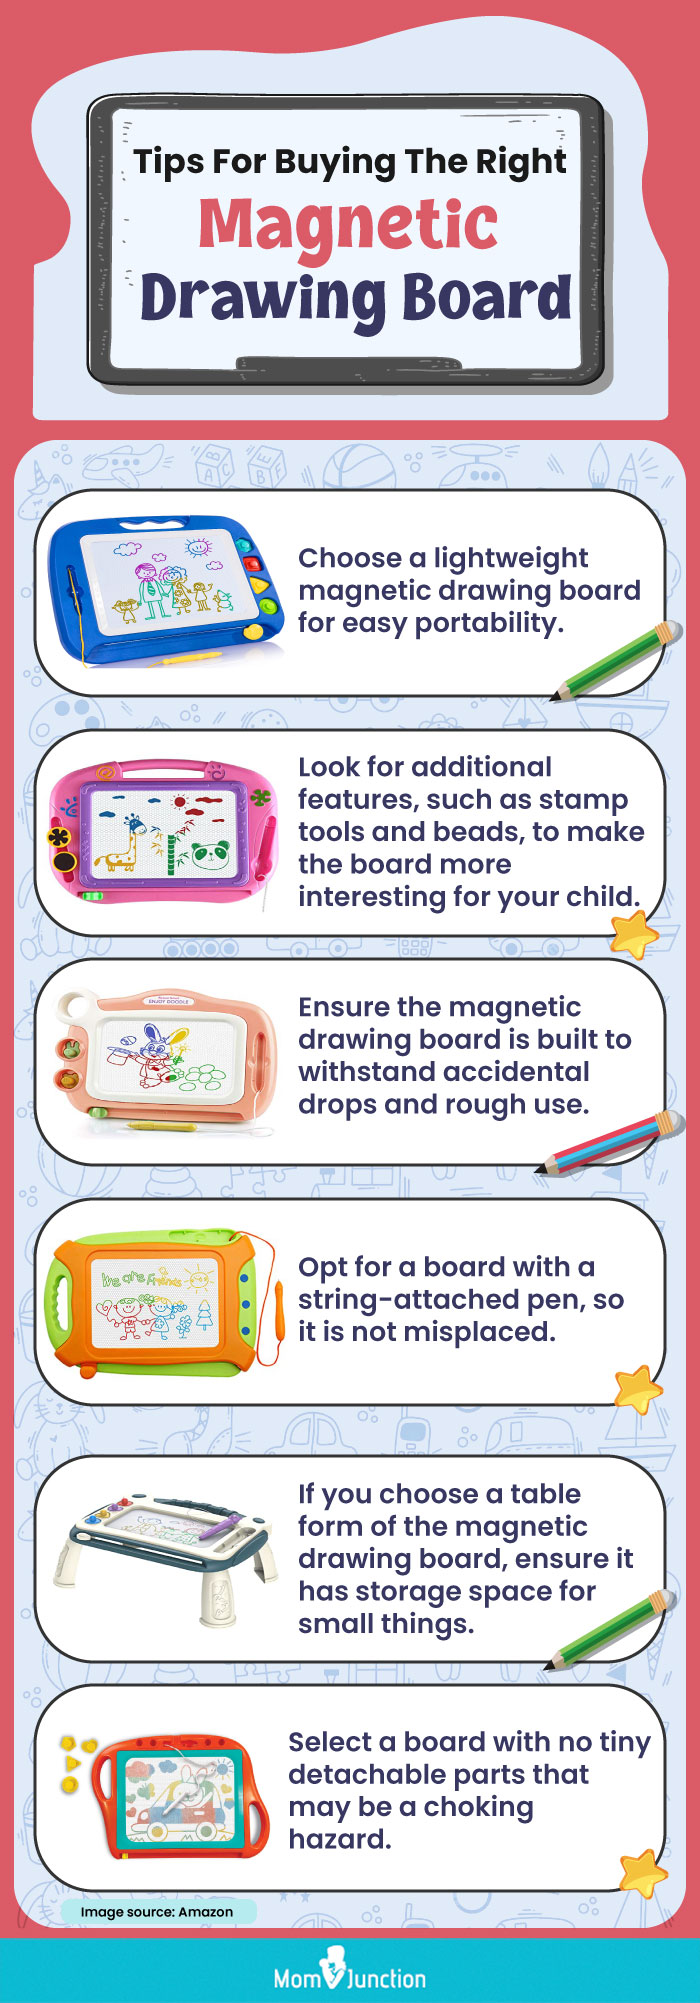 Tips For Buying The Right Magnetic Drawing Board (Infographic)